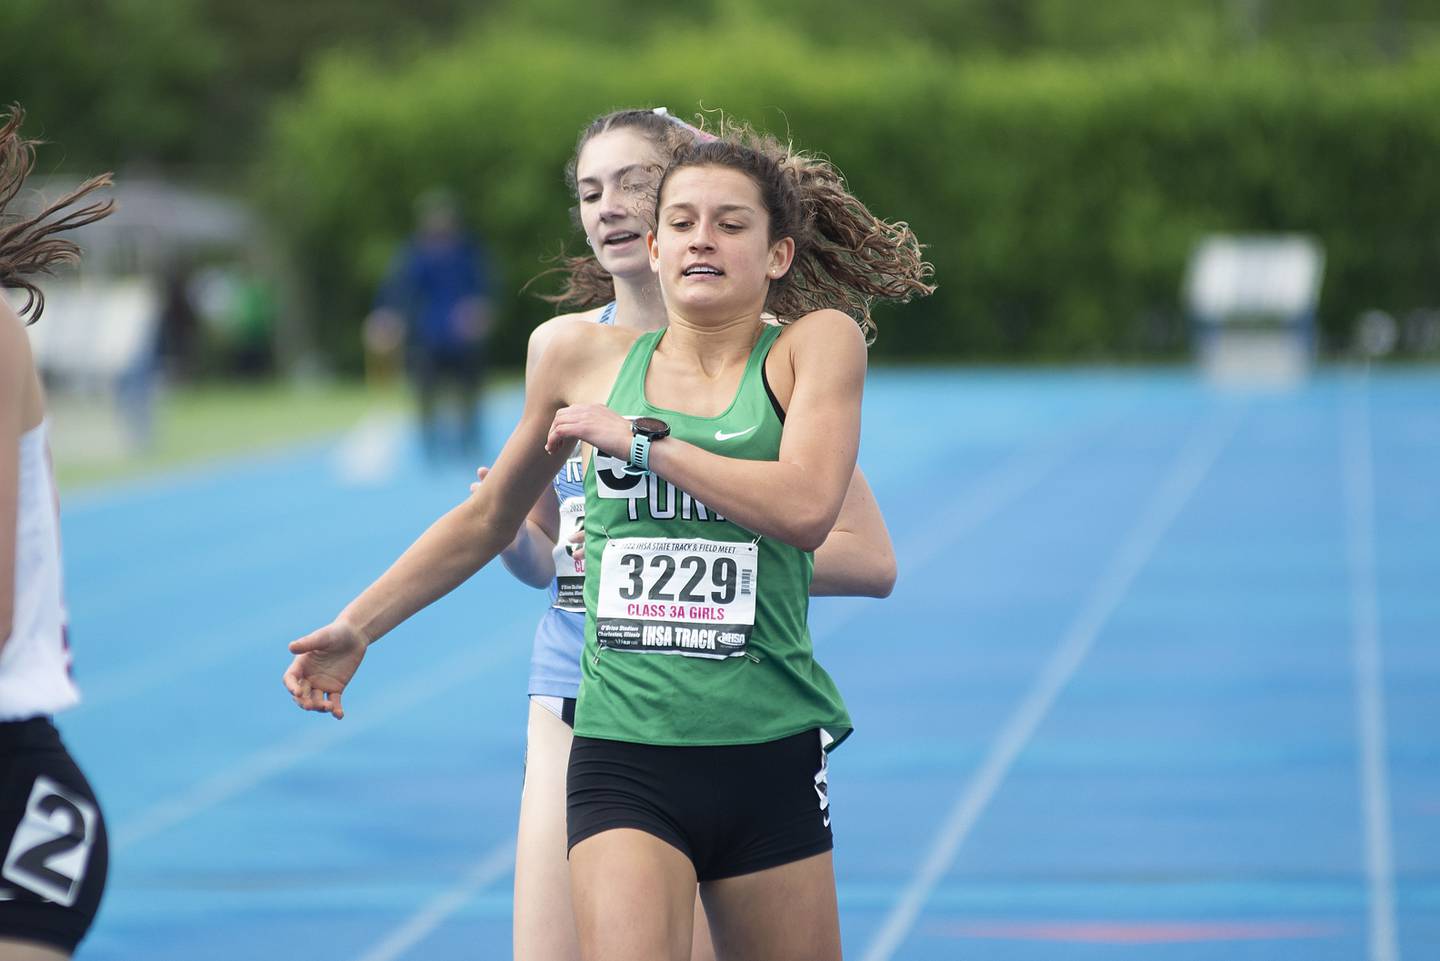 York's Brooke Berger competes in the 3A 800 finals during the IHSA girls state championships, Saturday, May 21, 2022 in Charleston.